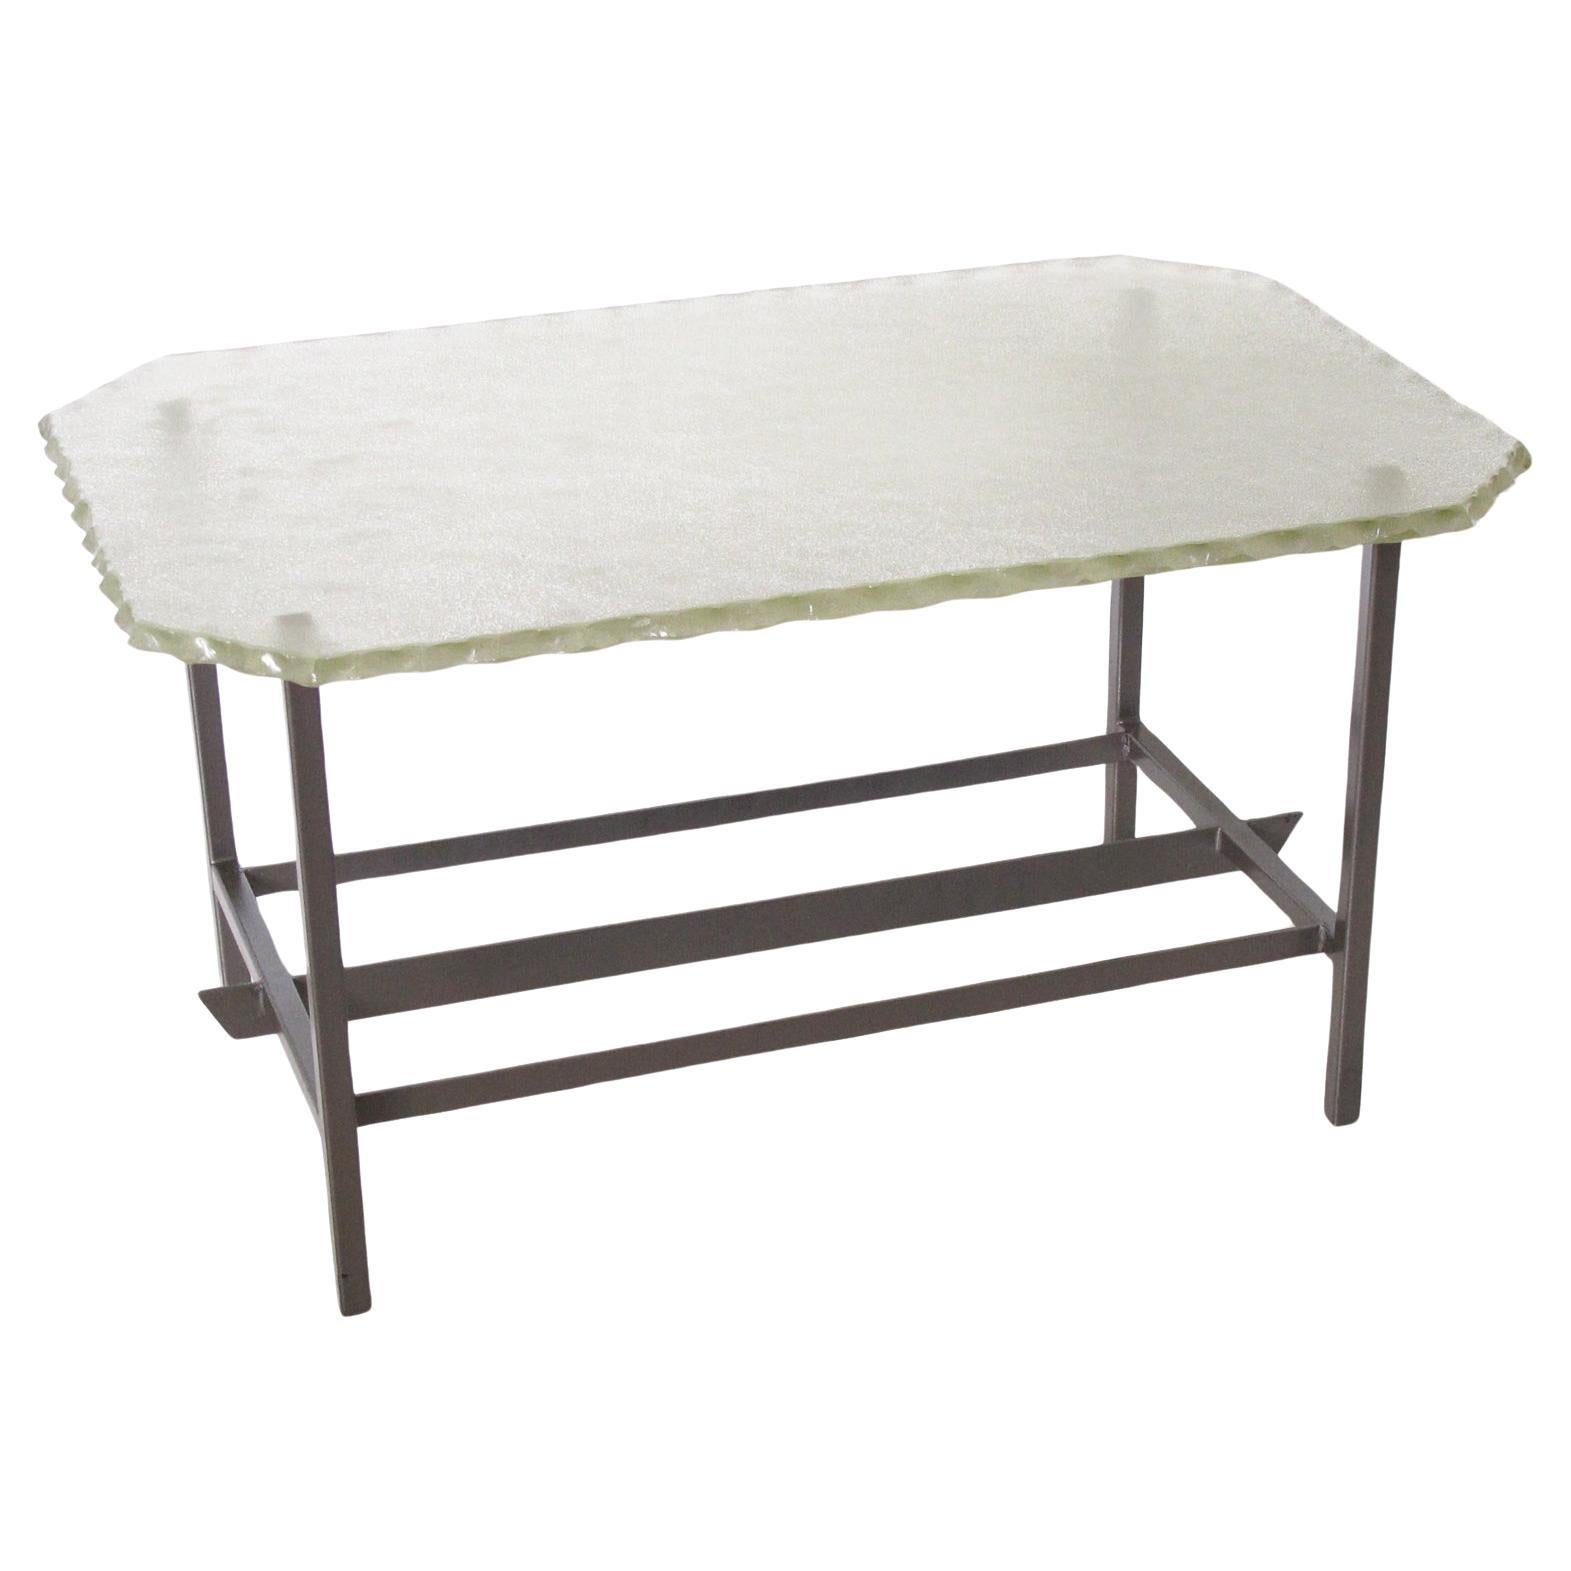 Pietro Chiesa for Fontana Arte Glass Slab and Metal Coffee Side Table For Sale